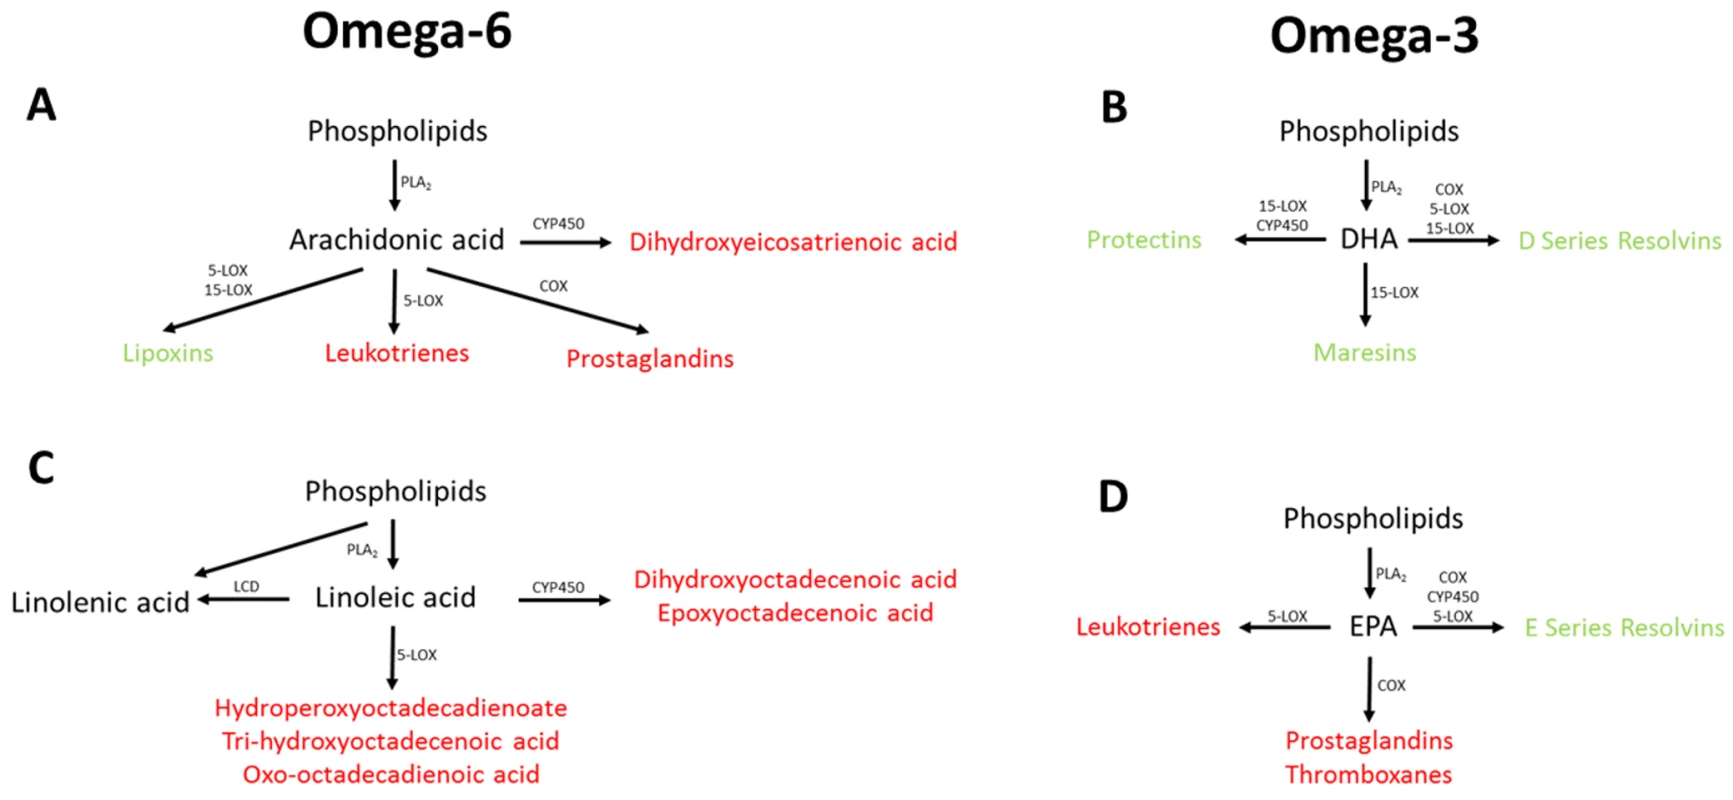 Overview of omega-3 and omega-6 UFA metabolism showing the potential association between the measured UFAs.